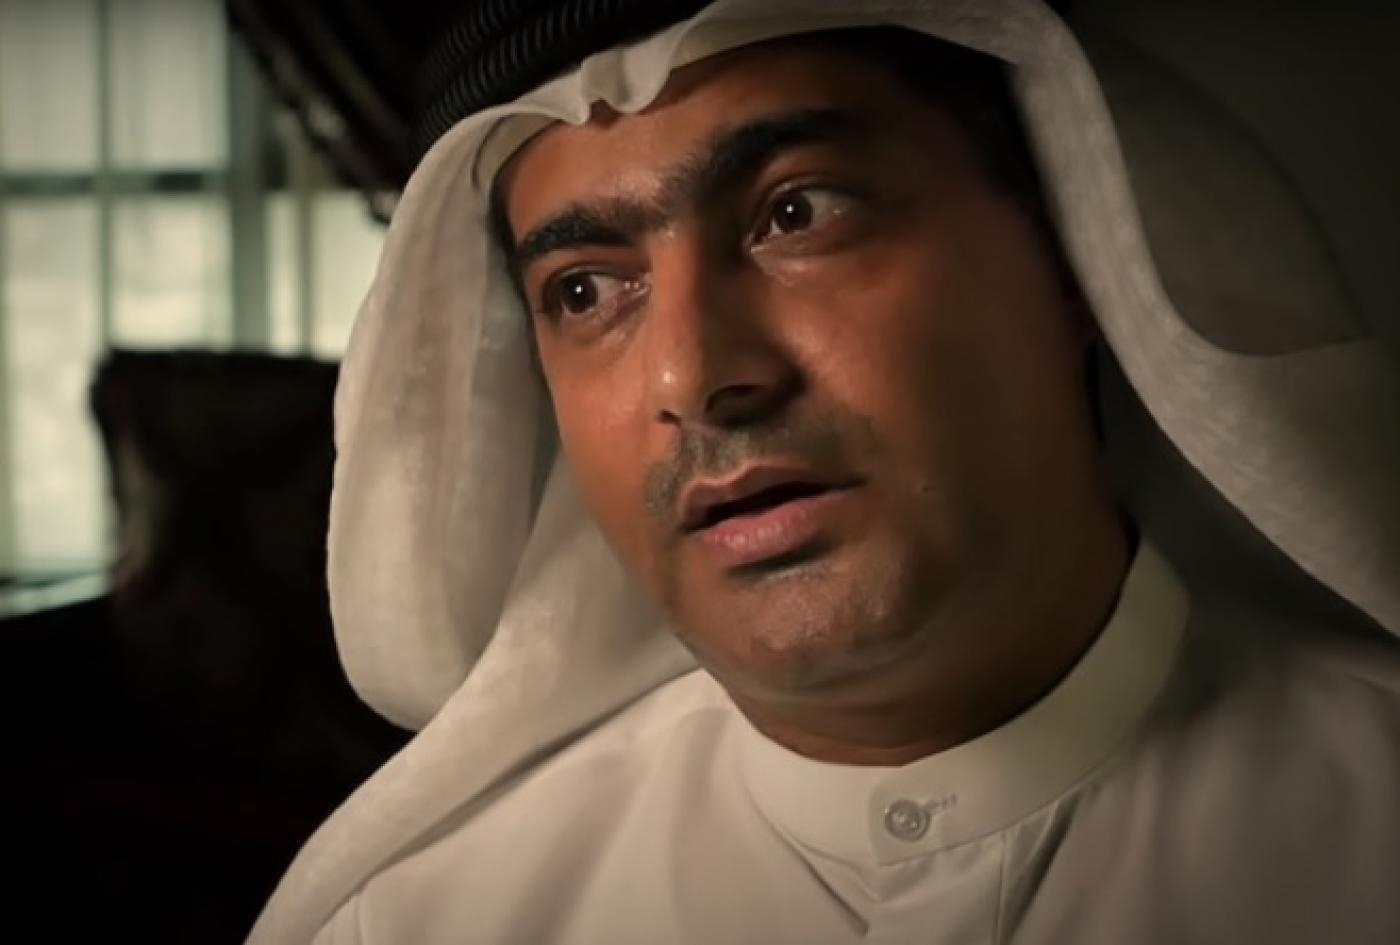 Mansoor is serving a 10-year sentence on charges relating to his human rights activism.